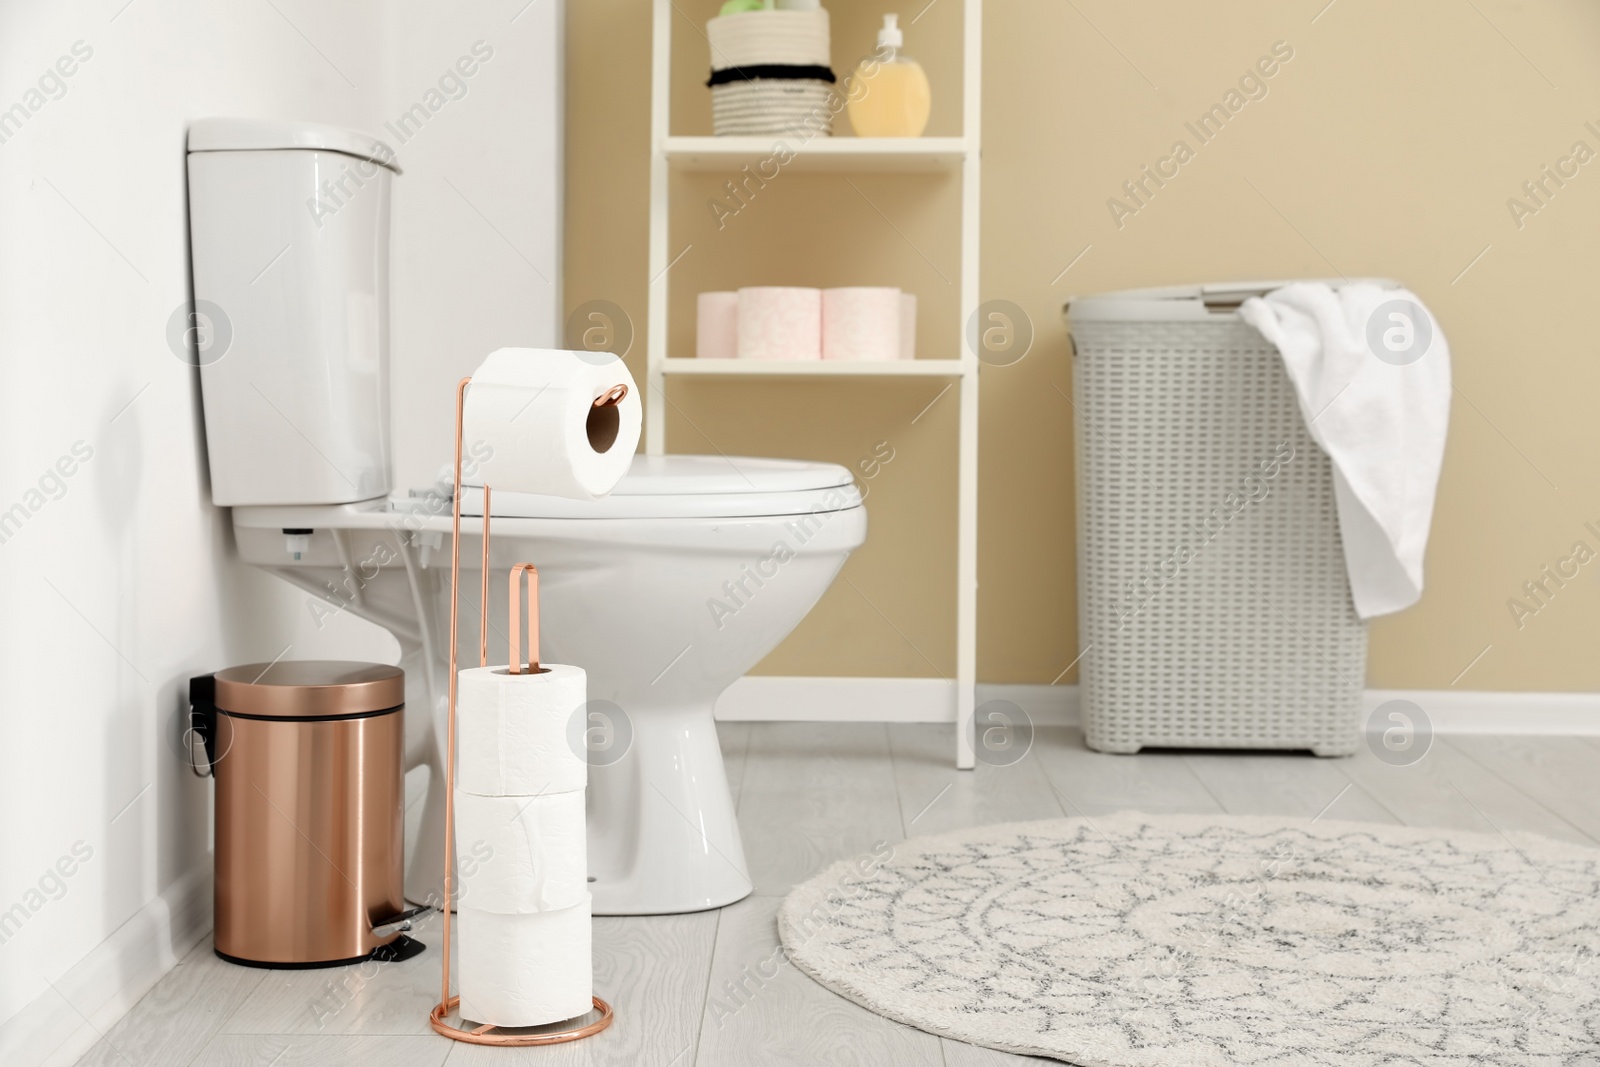 Photo of Holder with toilet paper rolls in bathroom